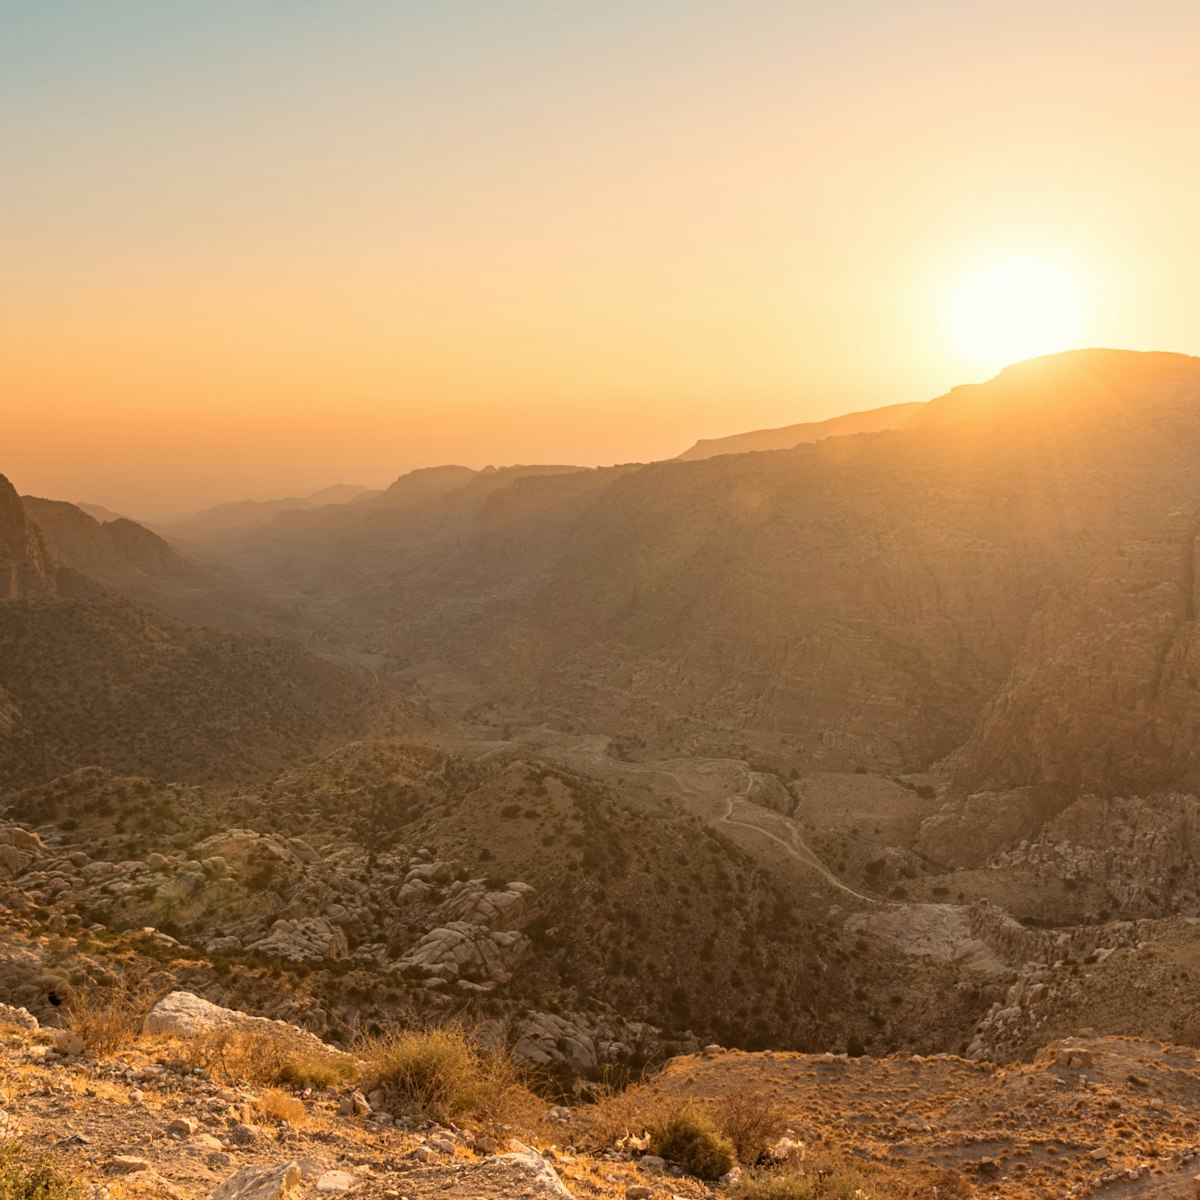 Dana Biosphere Reserve landscape at sunset from Dana historical village; Shutterstock ID 474783019; Your name (First / Last): Lauren Keith; GL account no.: 65050; Netsuite department name: Content Asset; Full Product or Project name including edition: Jordan 2017